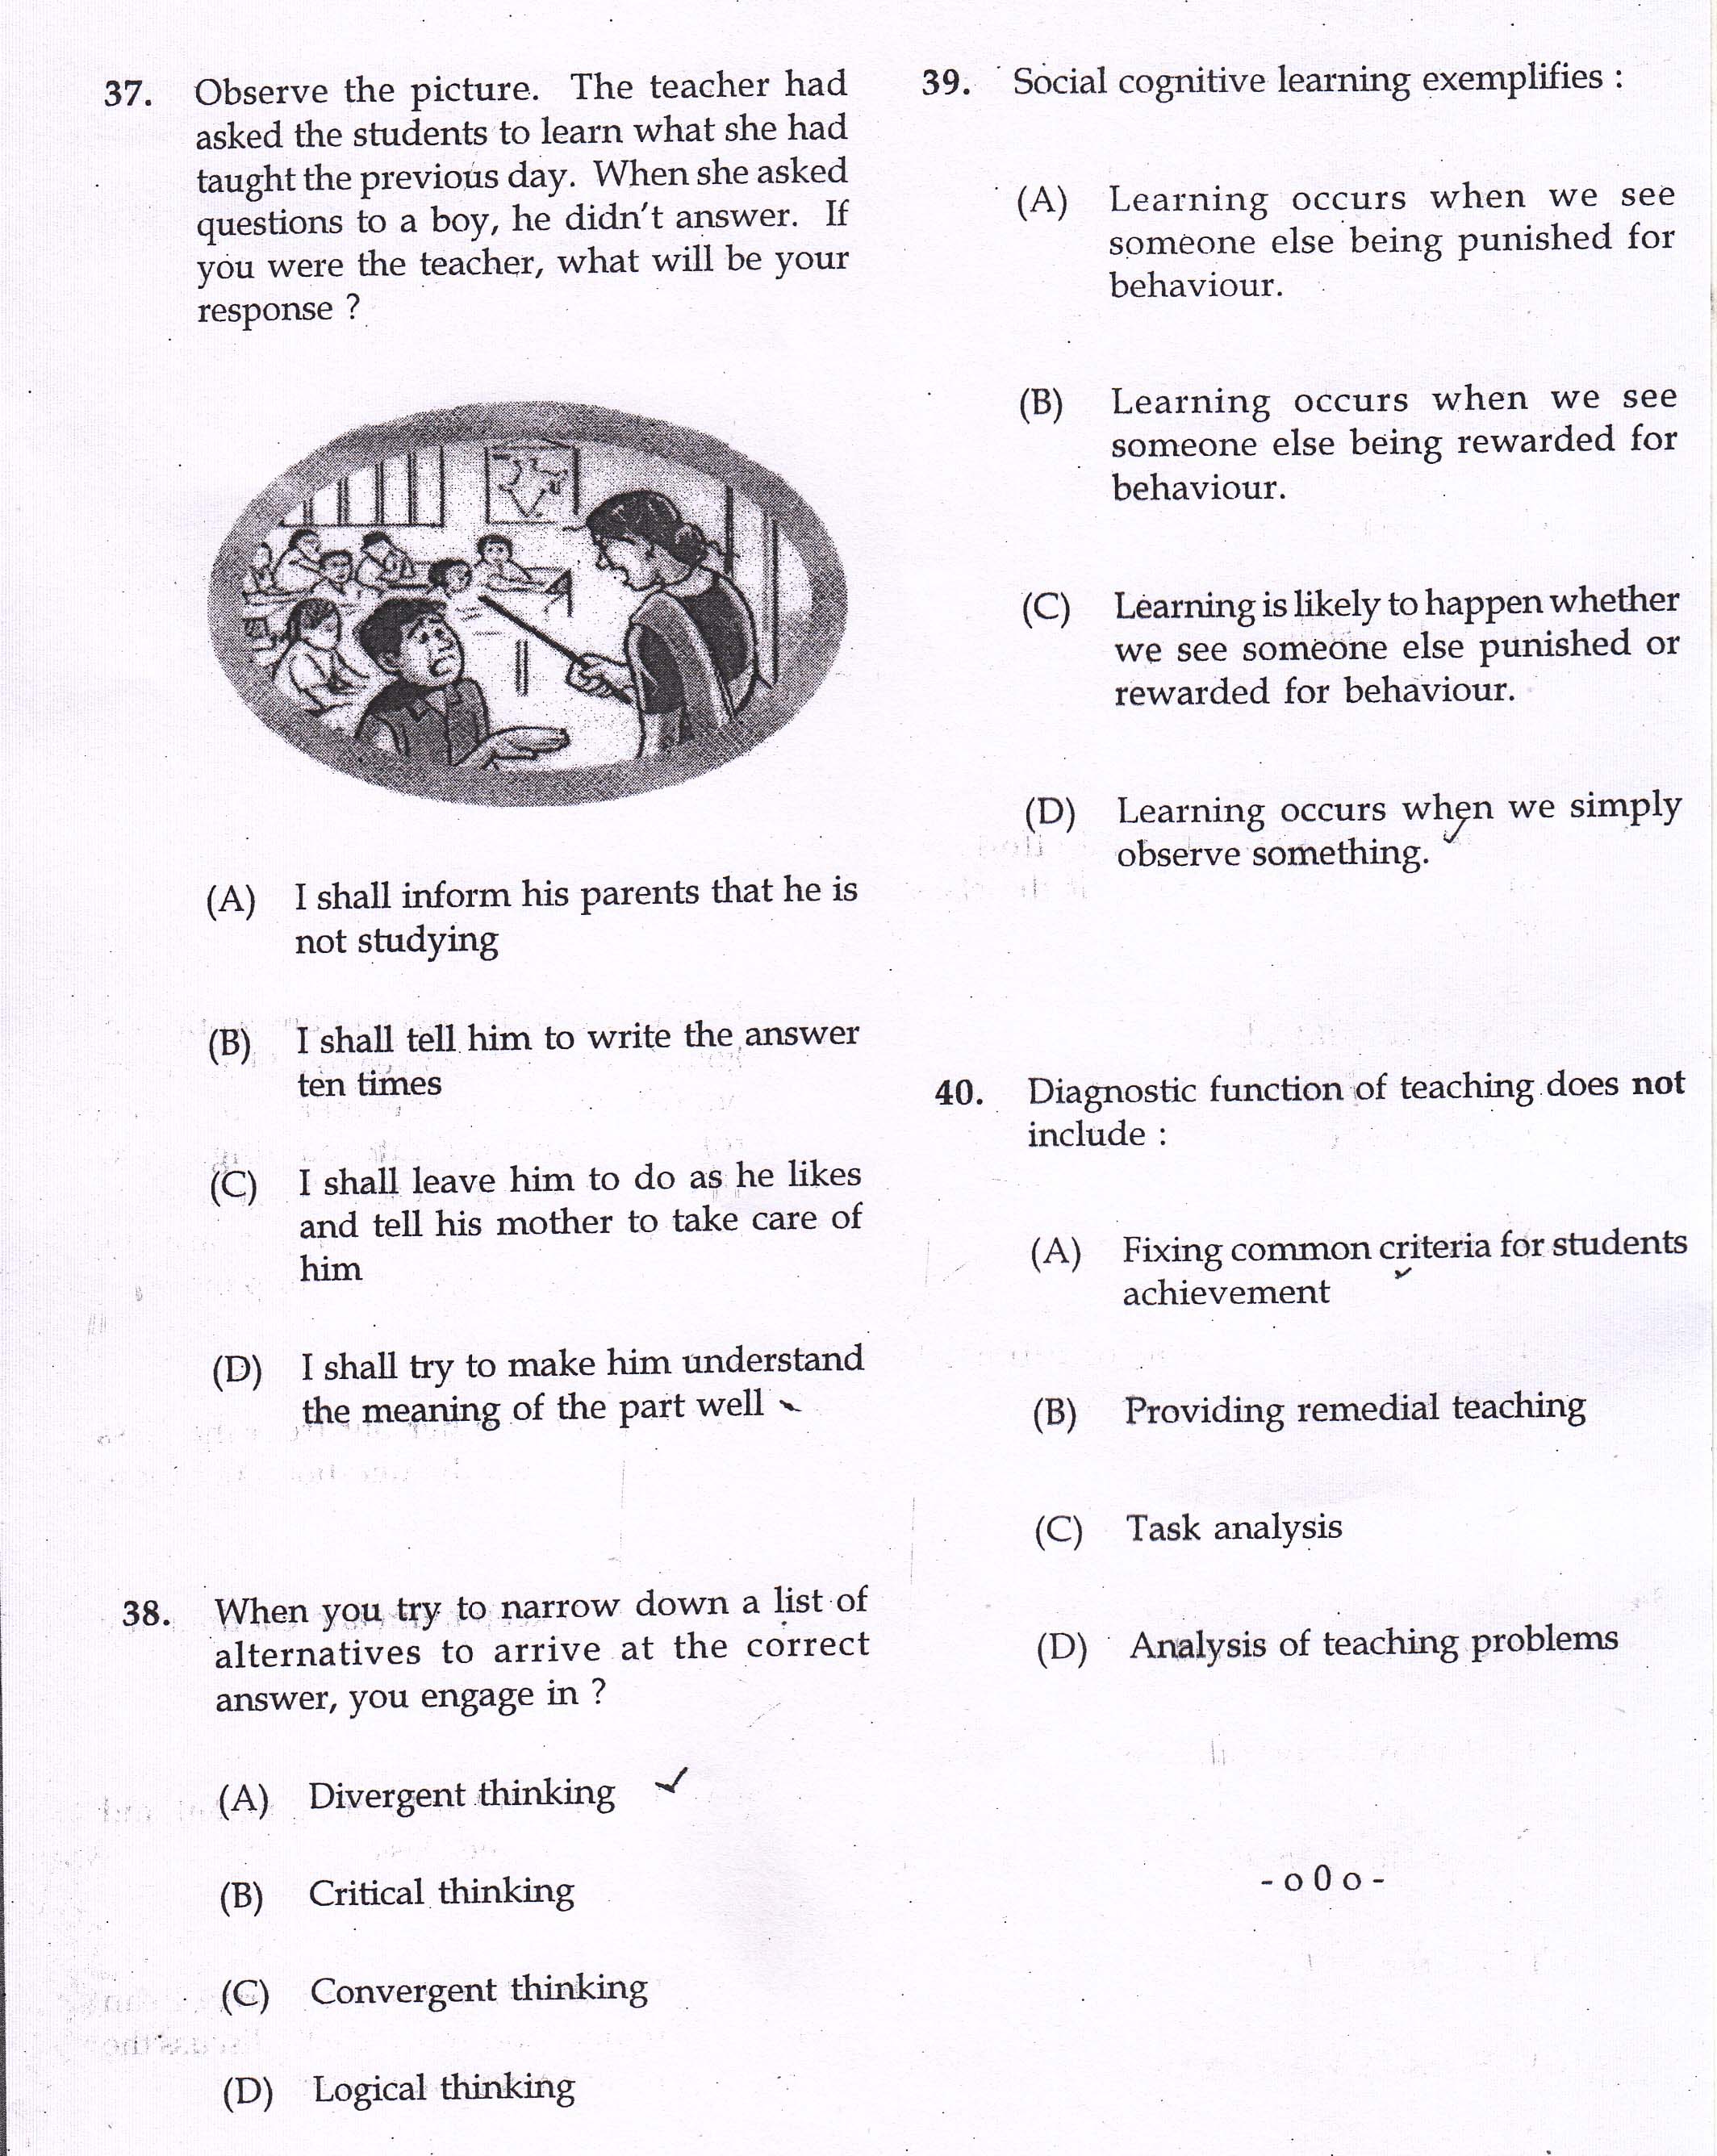 KTET Category III Part 1 Adolescent Psychology Question Paper with Answers 2017 7